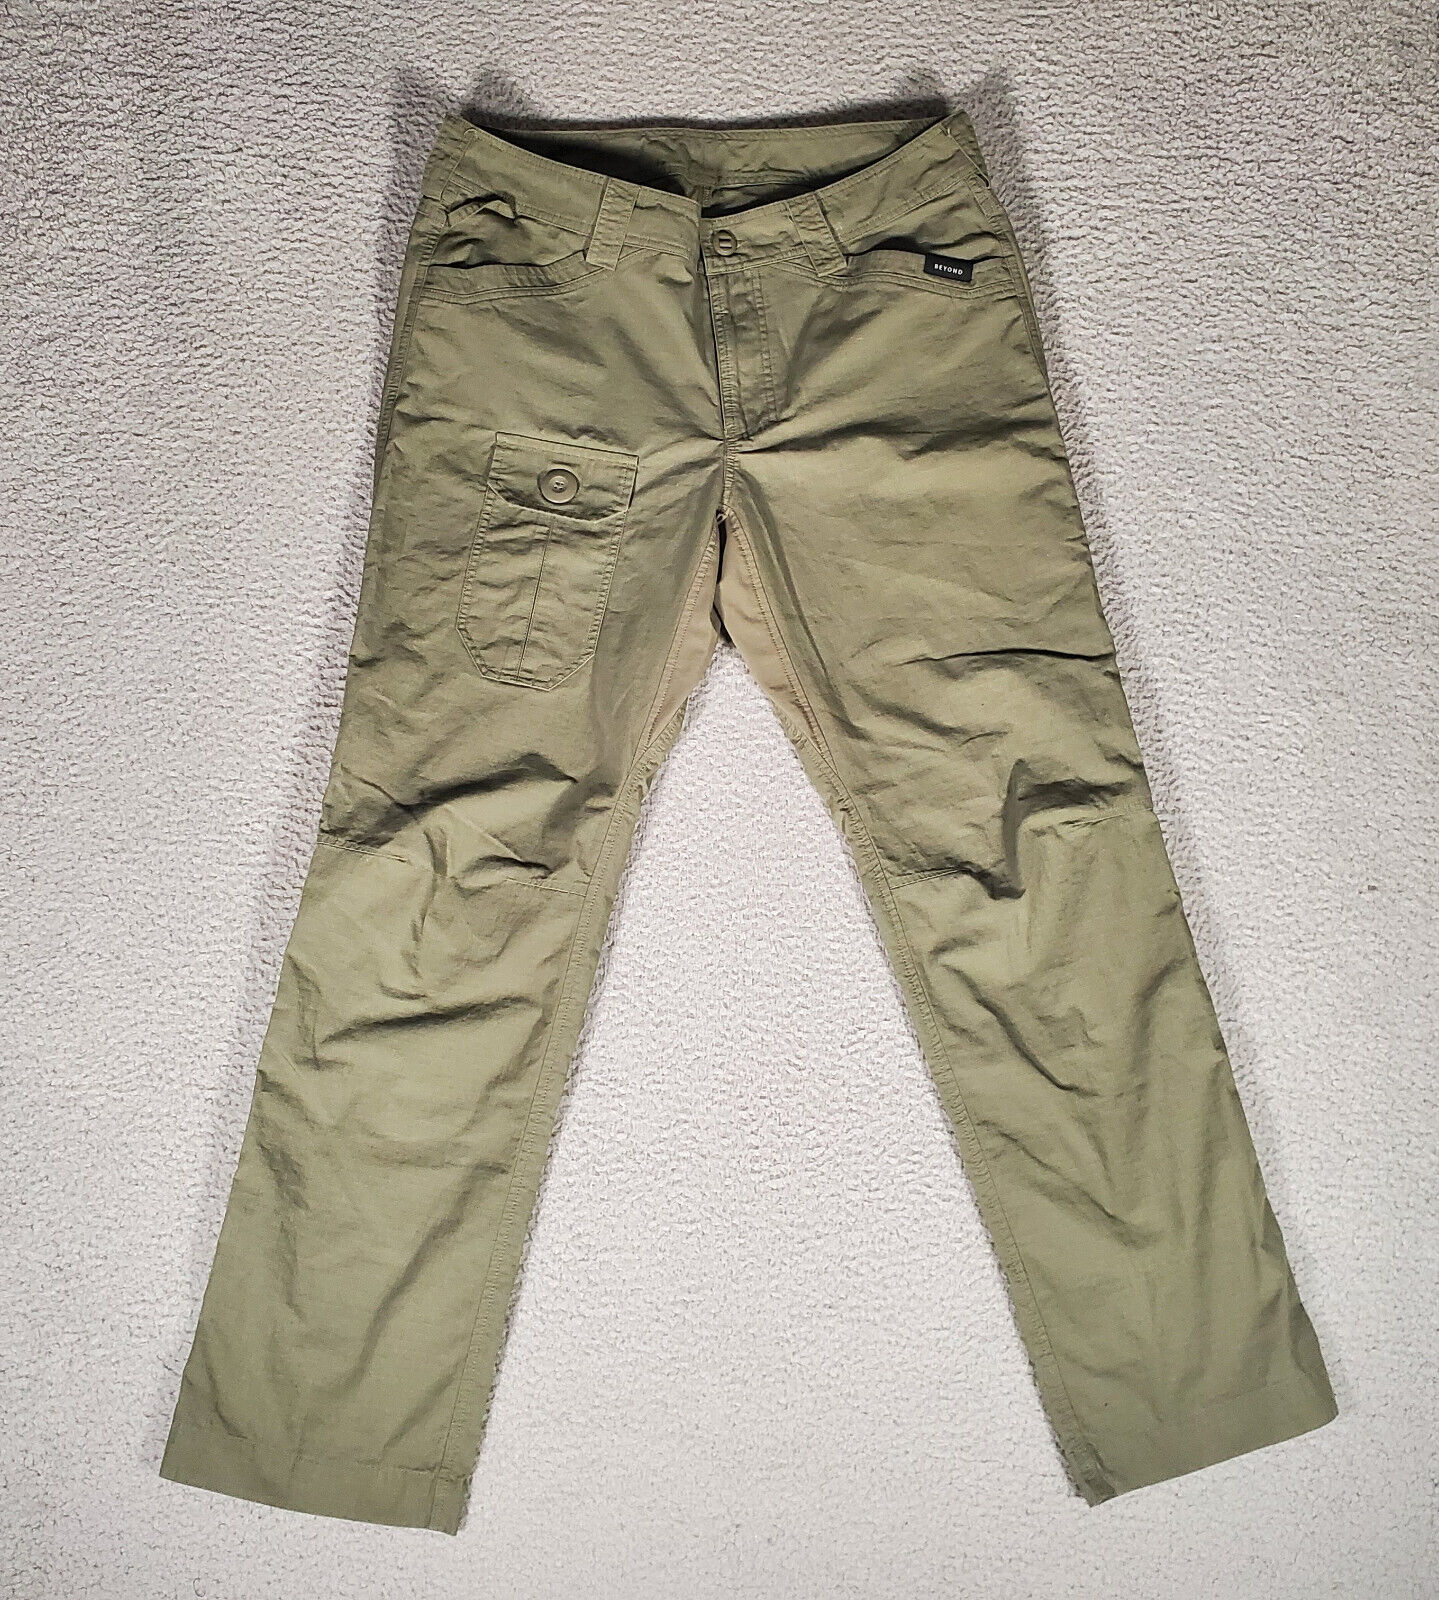 Beyond Clothing Combat Pants 34x30 Army Green Ripstop Canvas Stretch Lightweight